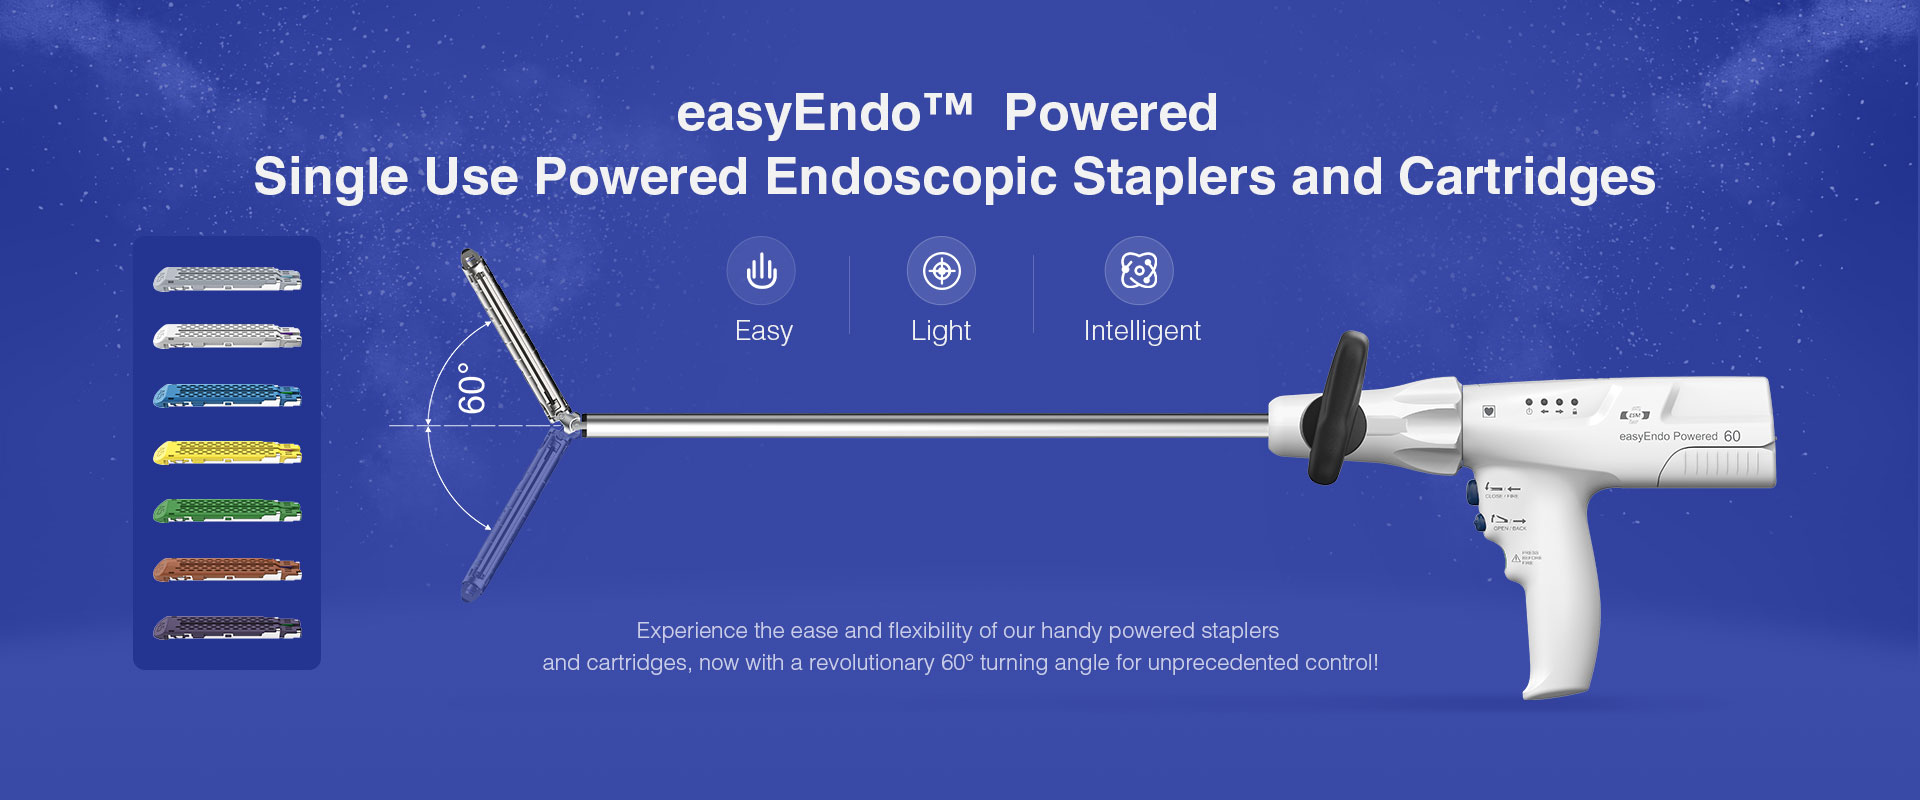 Single Use Powered Endoscopic Staplers and Cartridges